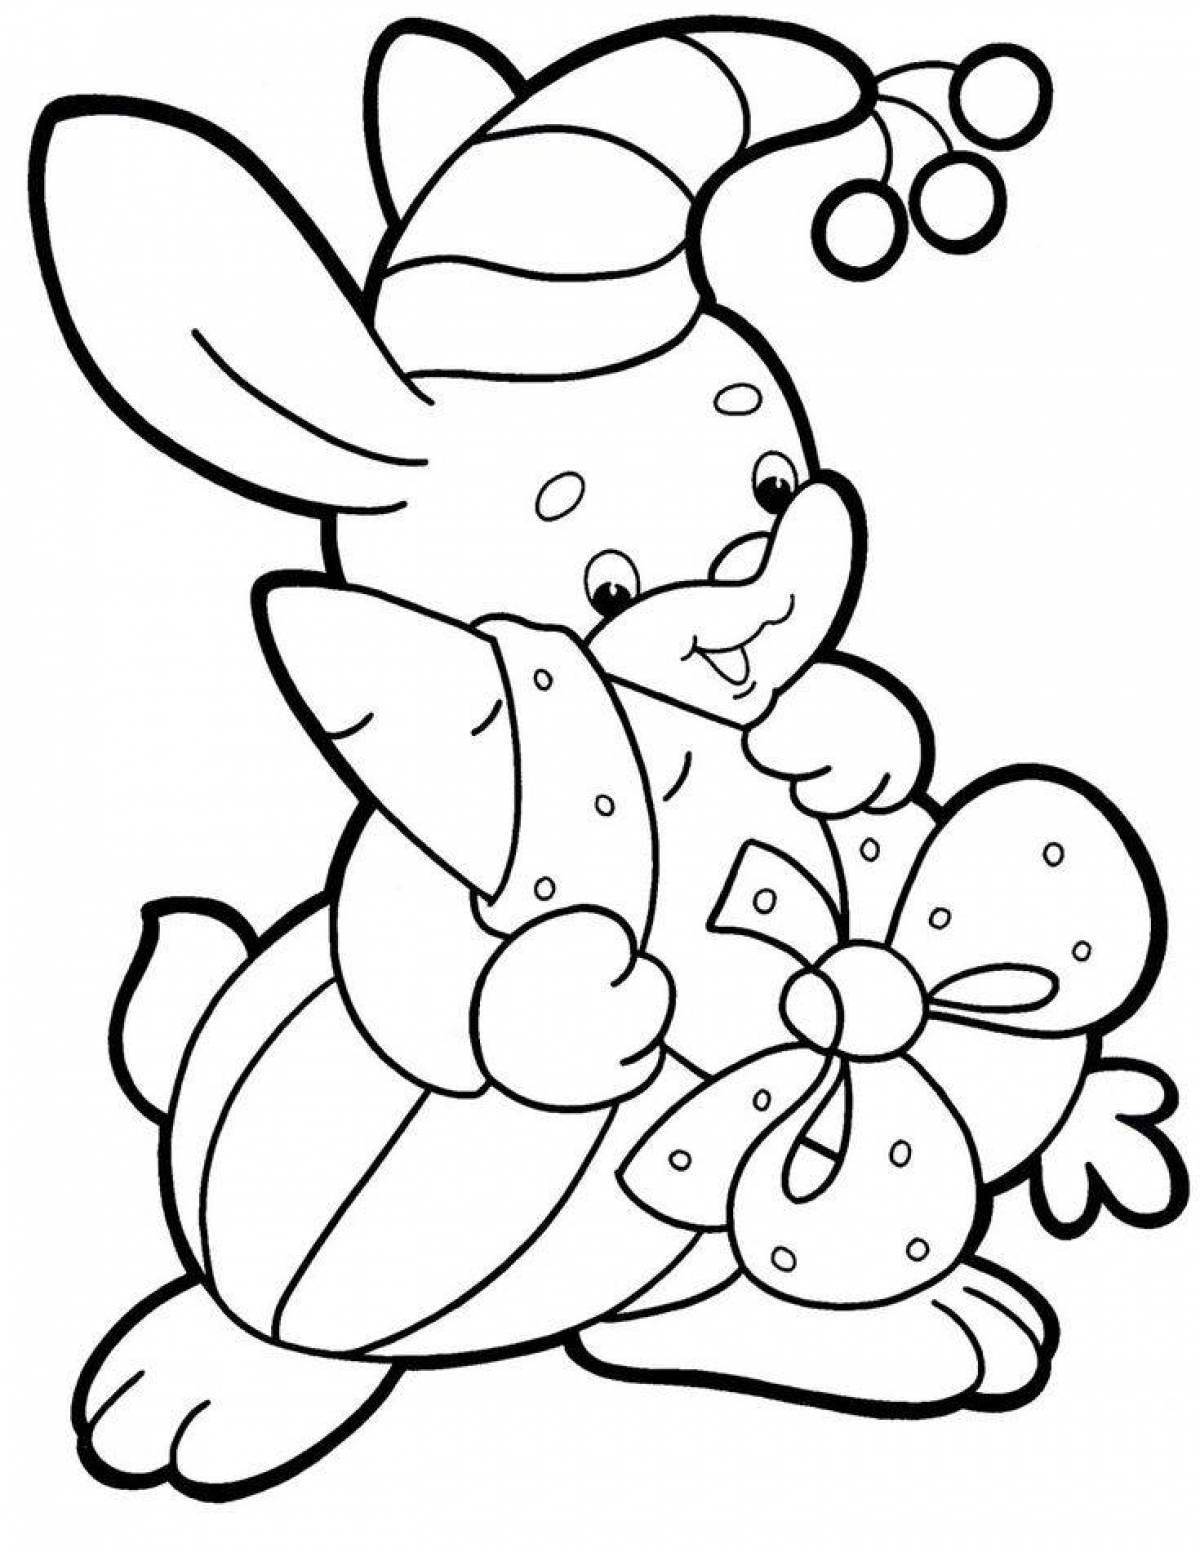 Colorful explosive Christmas bunny coloring page